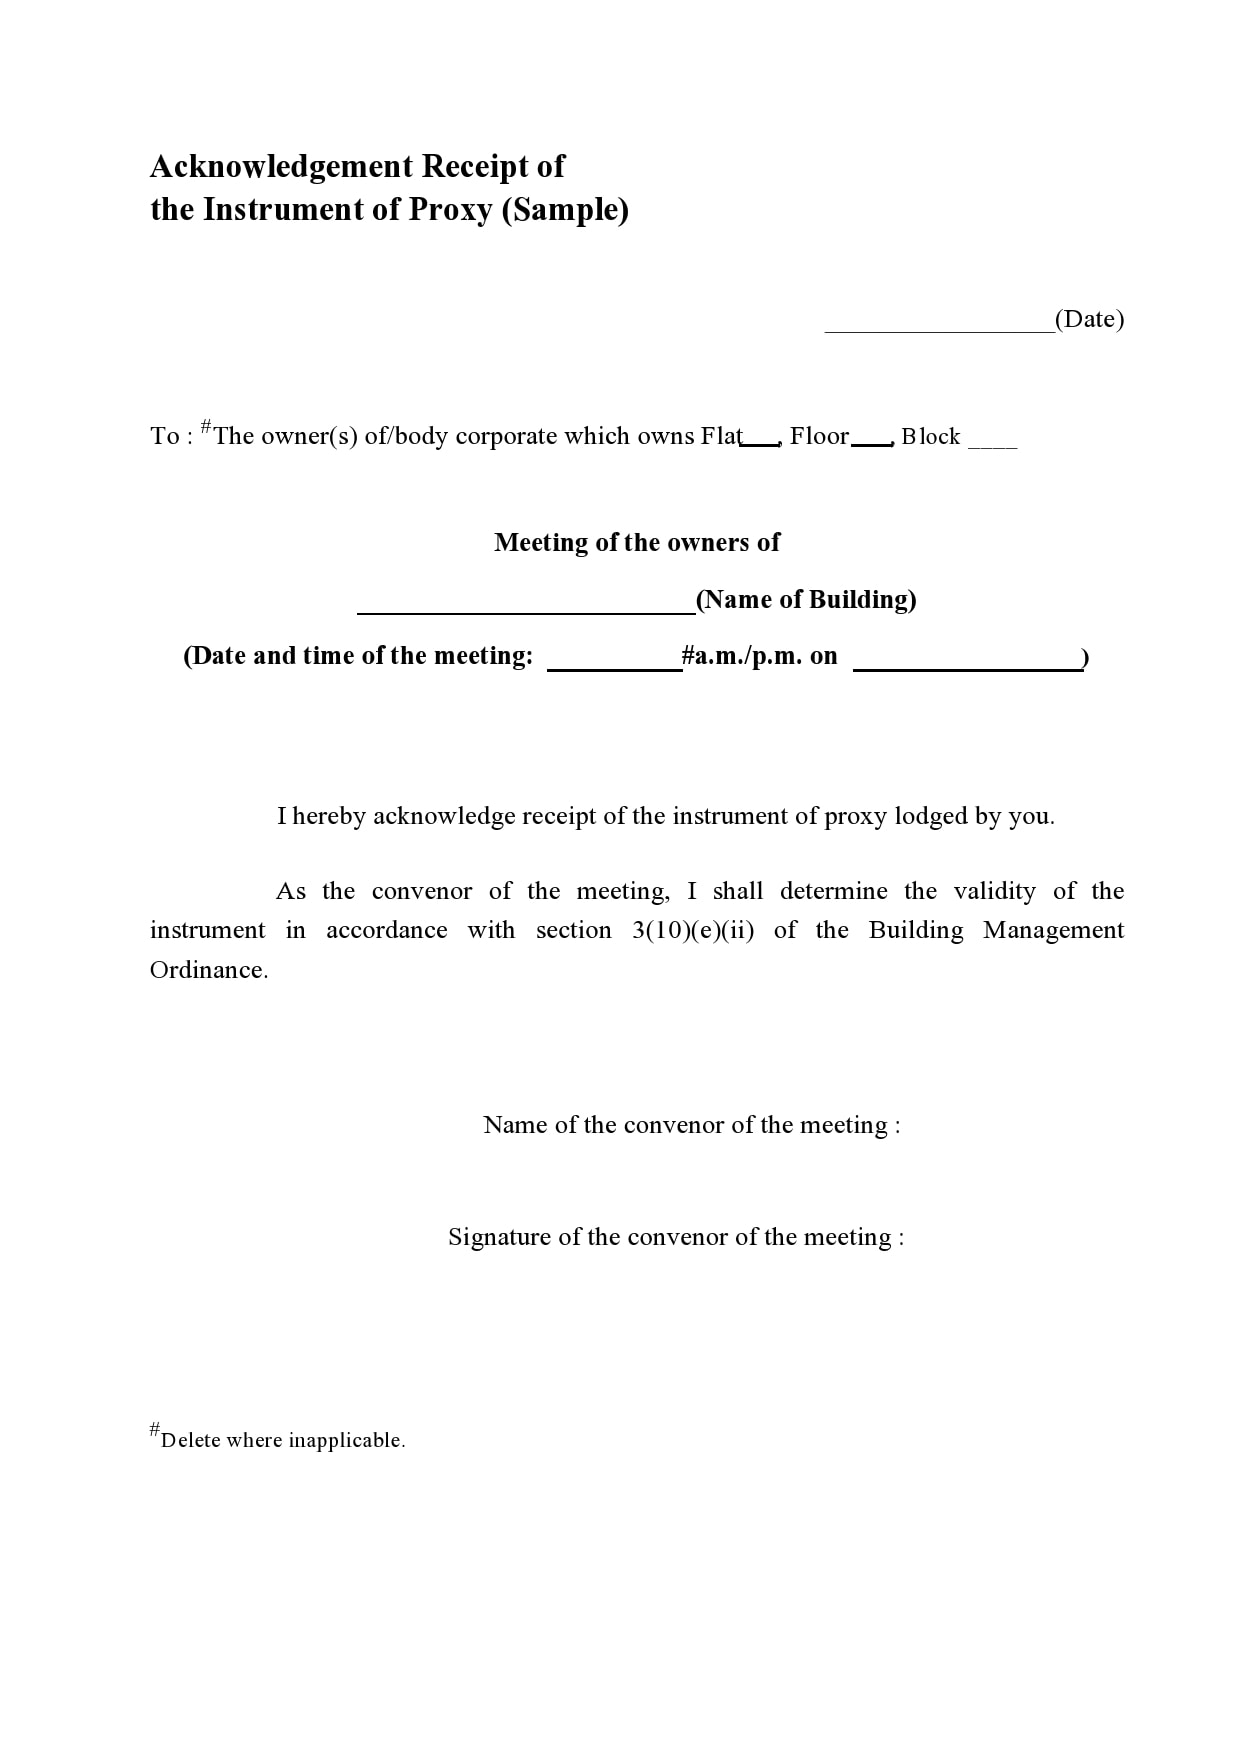 letter-of-acknowledgement-of-receipt-template-glamorous-receipt-forms